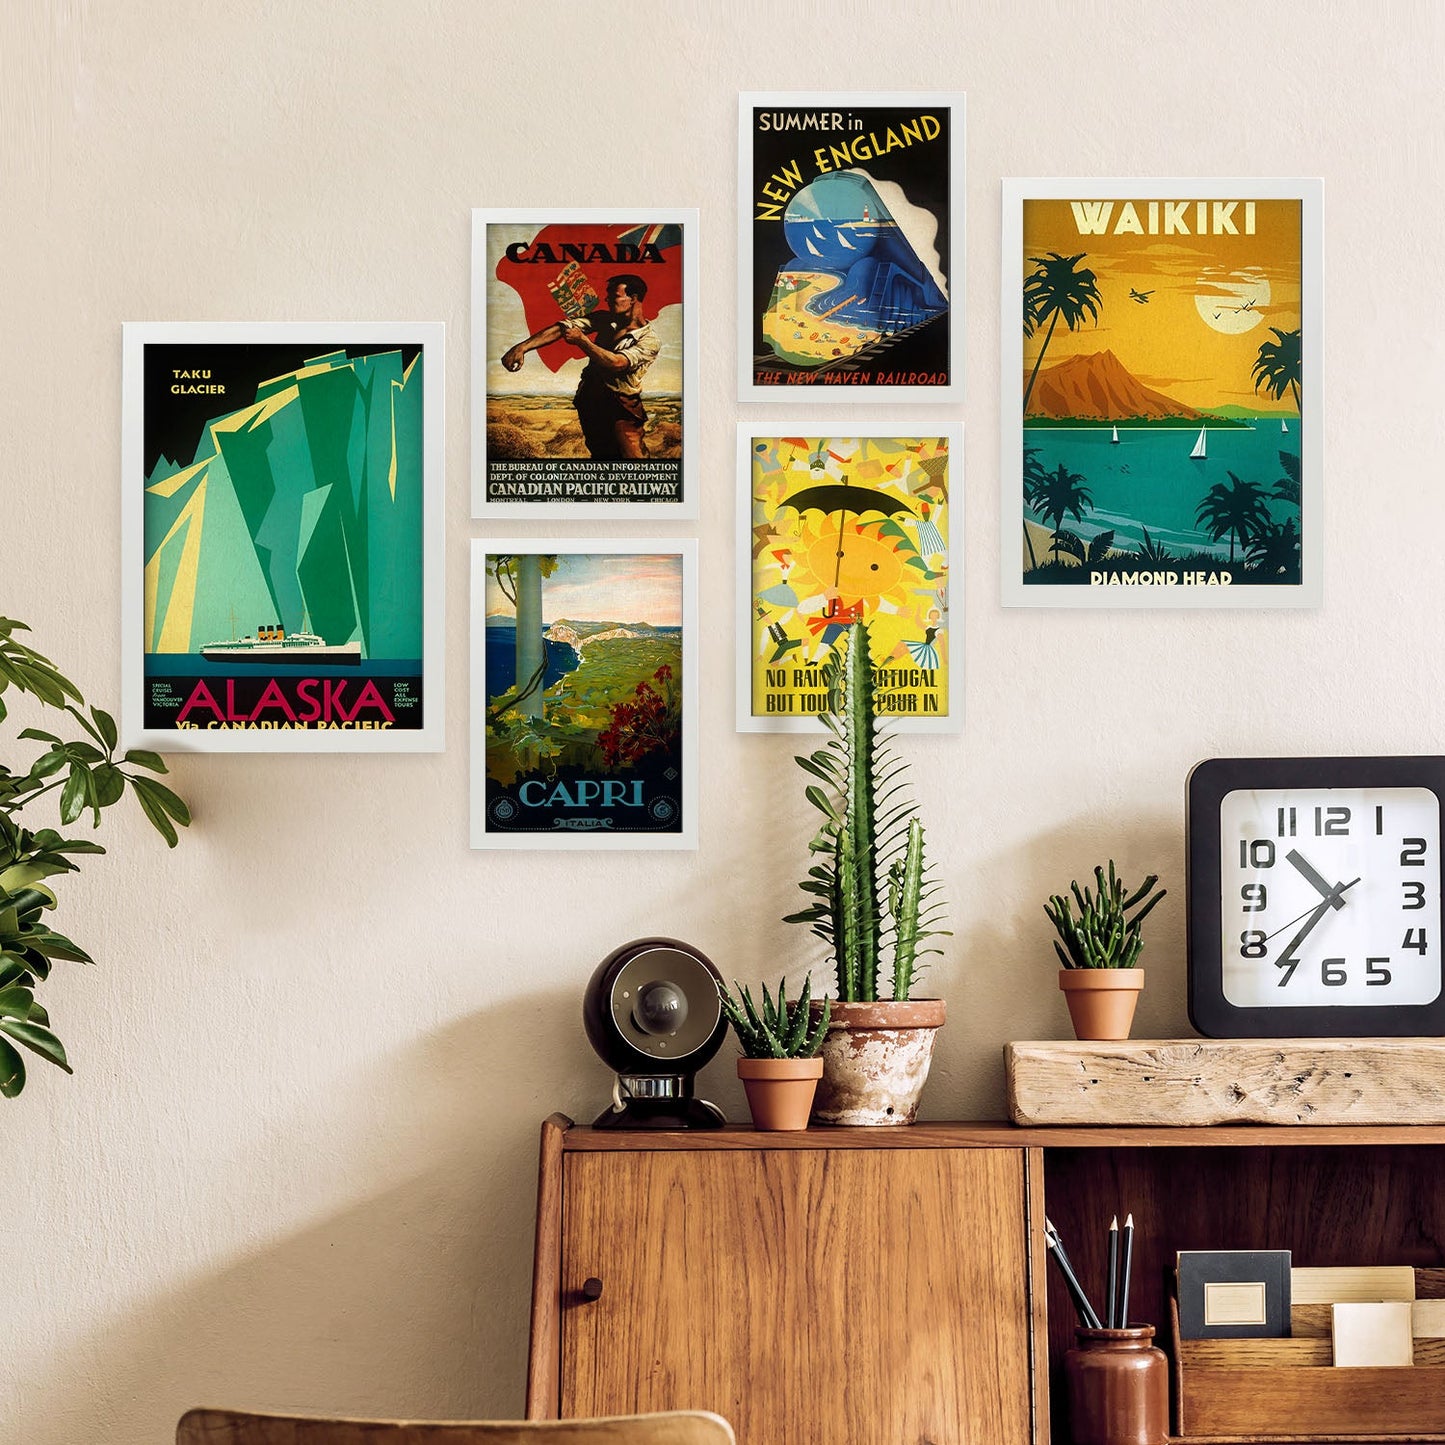 Nacnic paises mix 3. Aesthetic Wall Art Prints for Bedroom or Living Room Design.